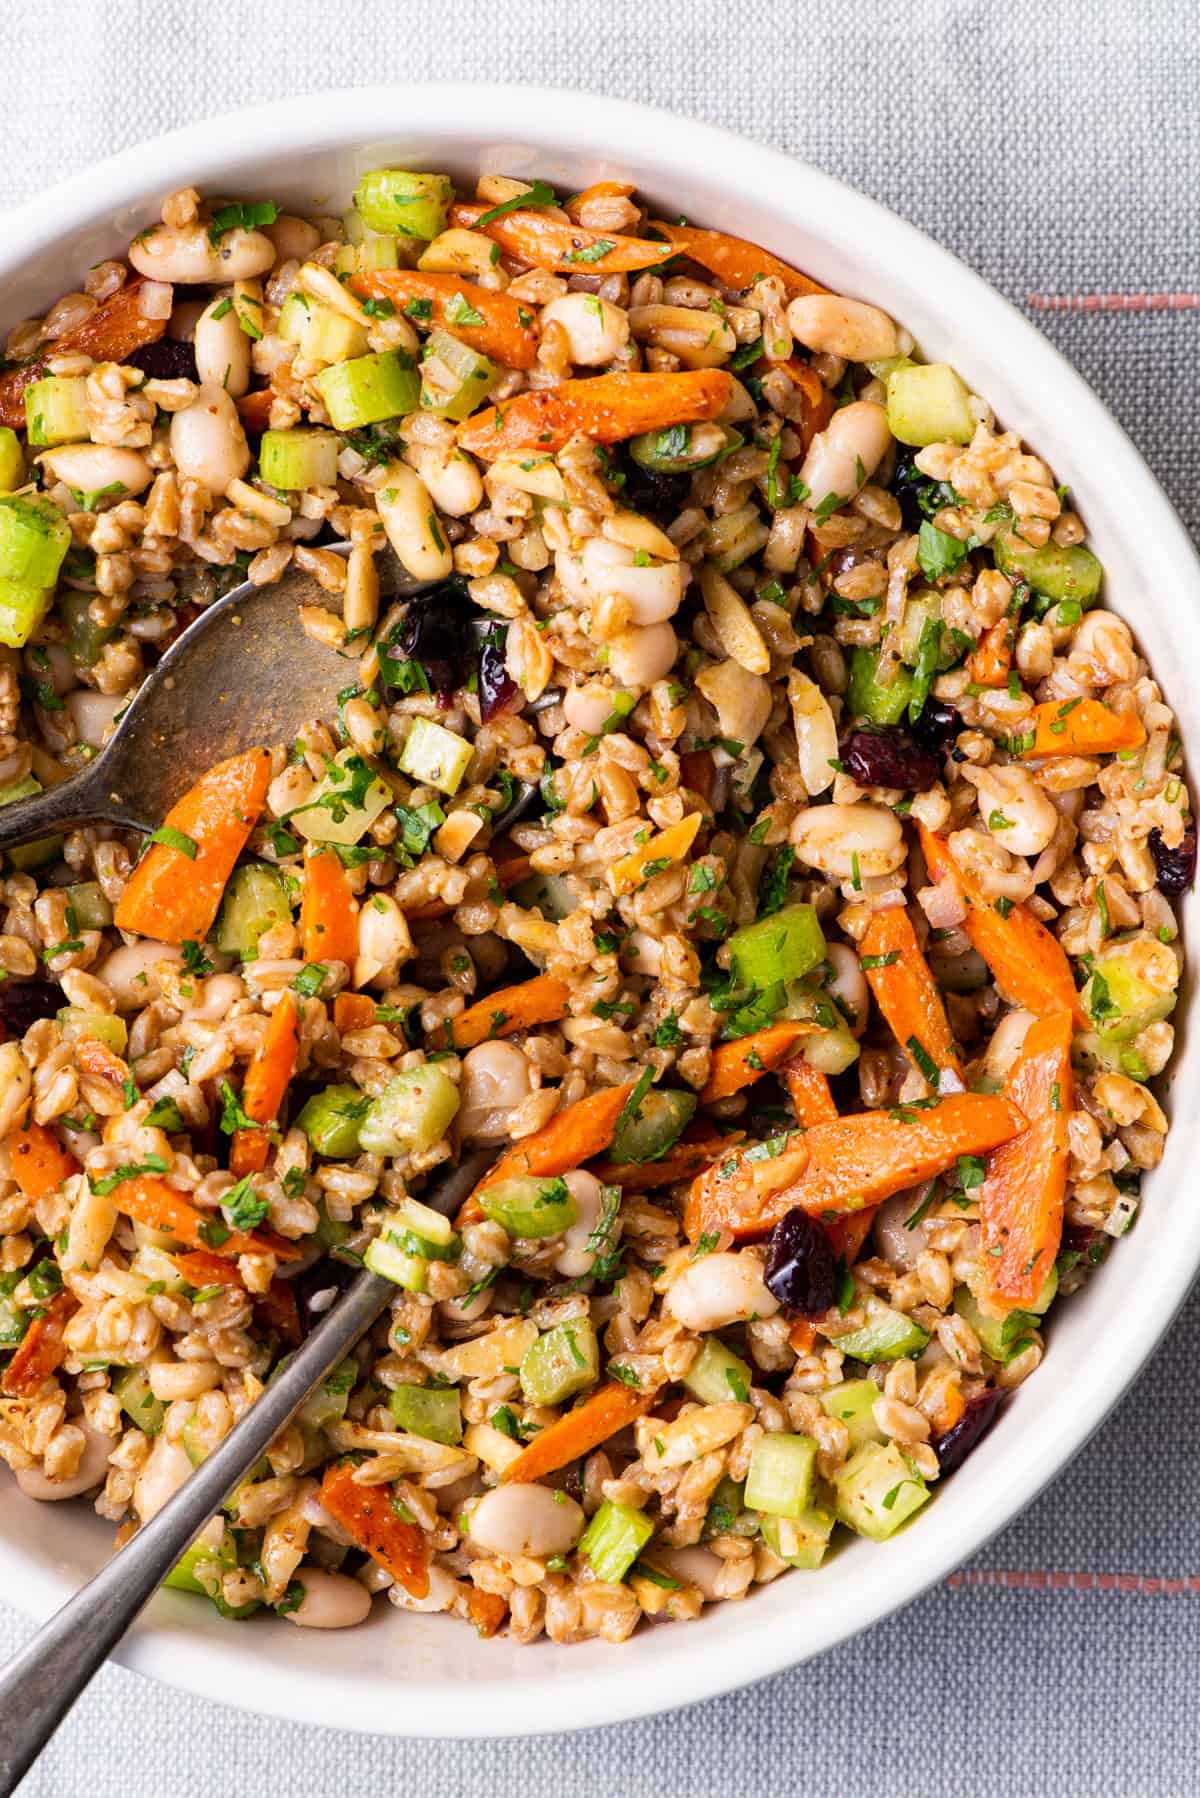 Fall farro salad with carrots, celery, cranberries, and almonds.